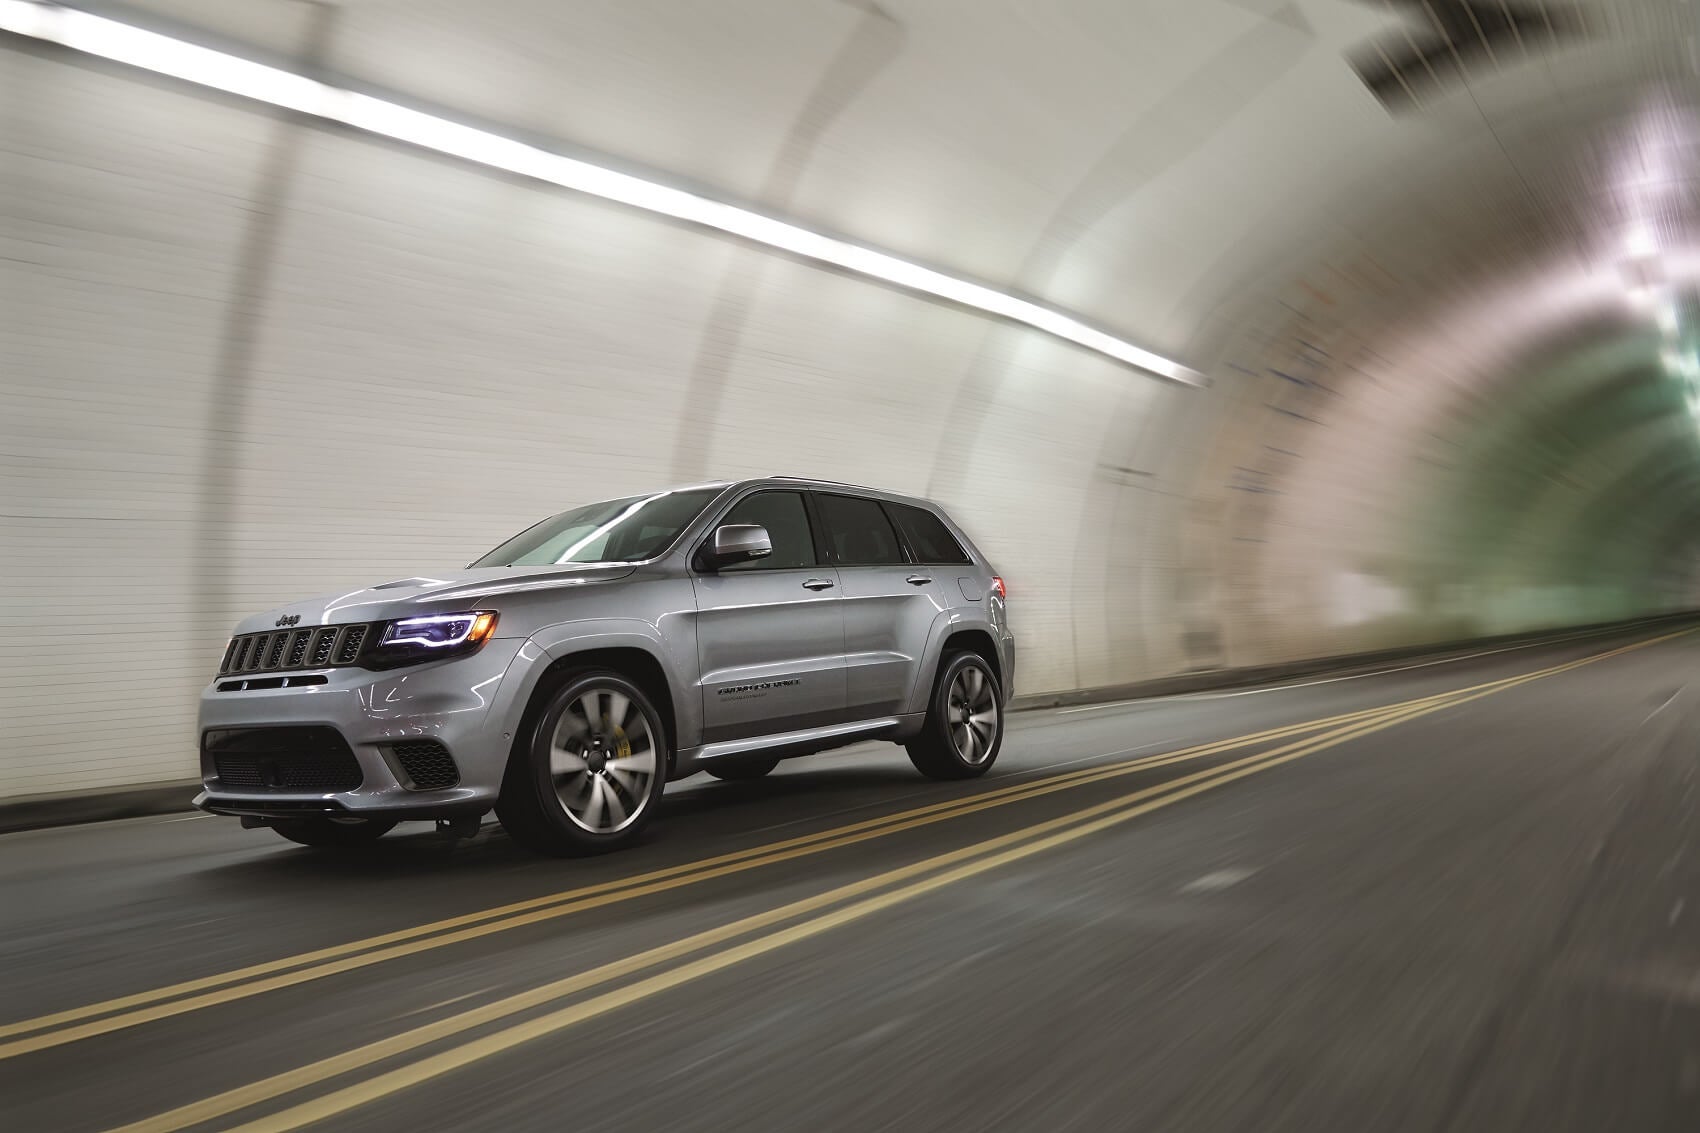 Jeep Grand Cherokee in Tunnel